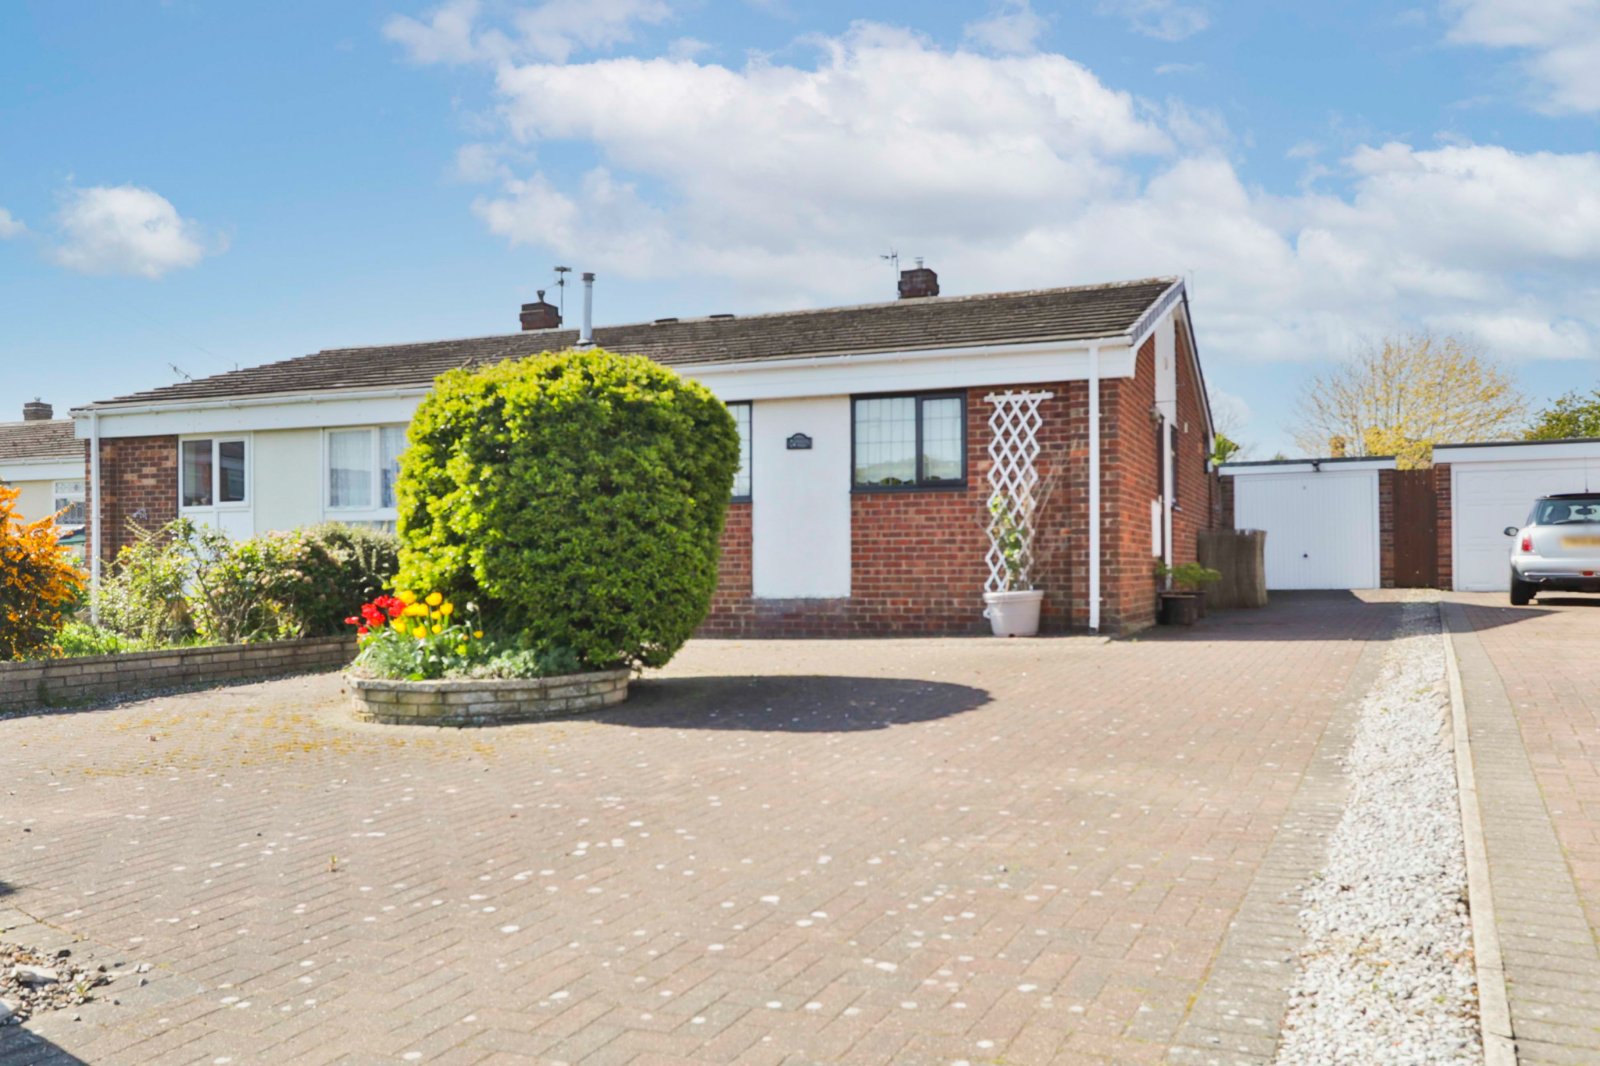 2 bed bungalow for sale in Inmans Road, Hedon, HU12